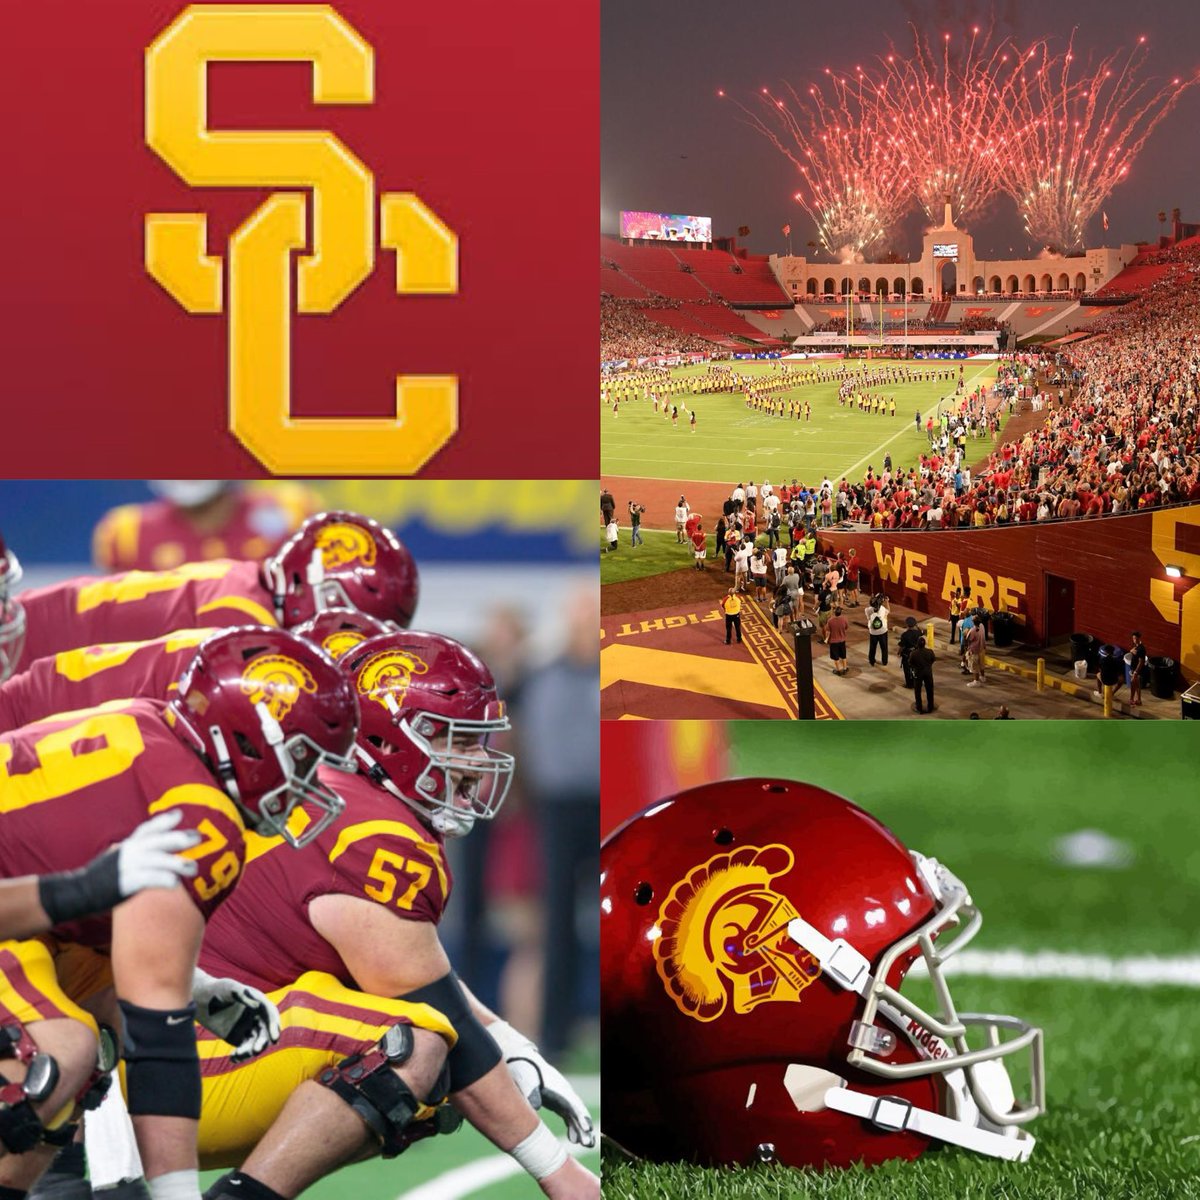 Truly blessed and honored to receive an offer from the University of Southern California #FightOn ✌🏽 @Coach_Henson @LincolnRiley @AaronAmaama @uscfb @skyridgefb @coachjhemm @JonLehman @BigT2k76 @kanuch78 @Kneeyou77 @adamgorney @BlairAngulo @BrandonHuffman @ChadSimmons_…